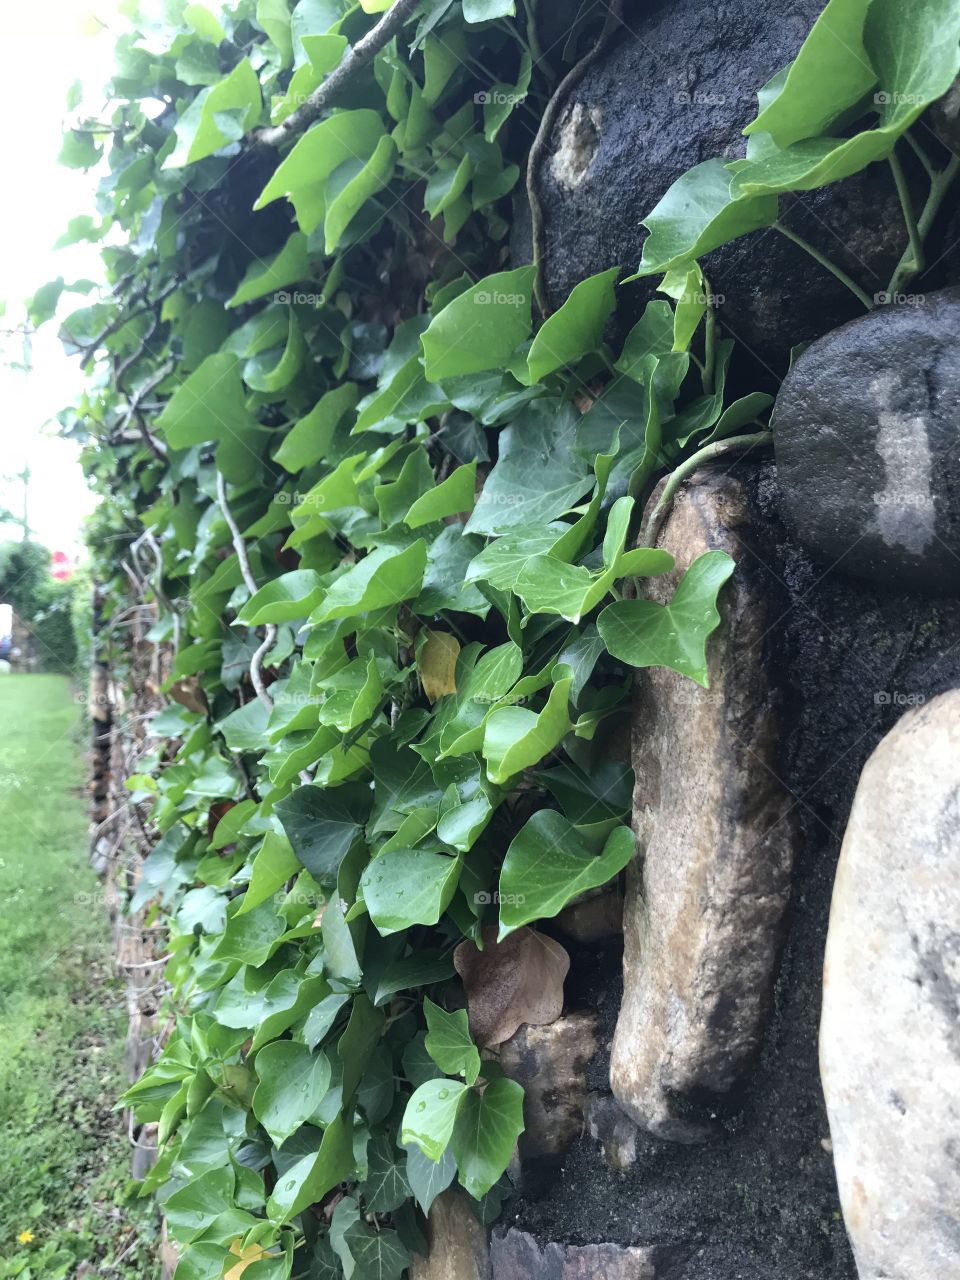 English ivy growing on a stone wall in Brevard, NC